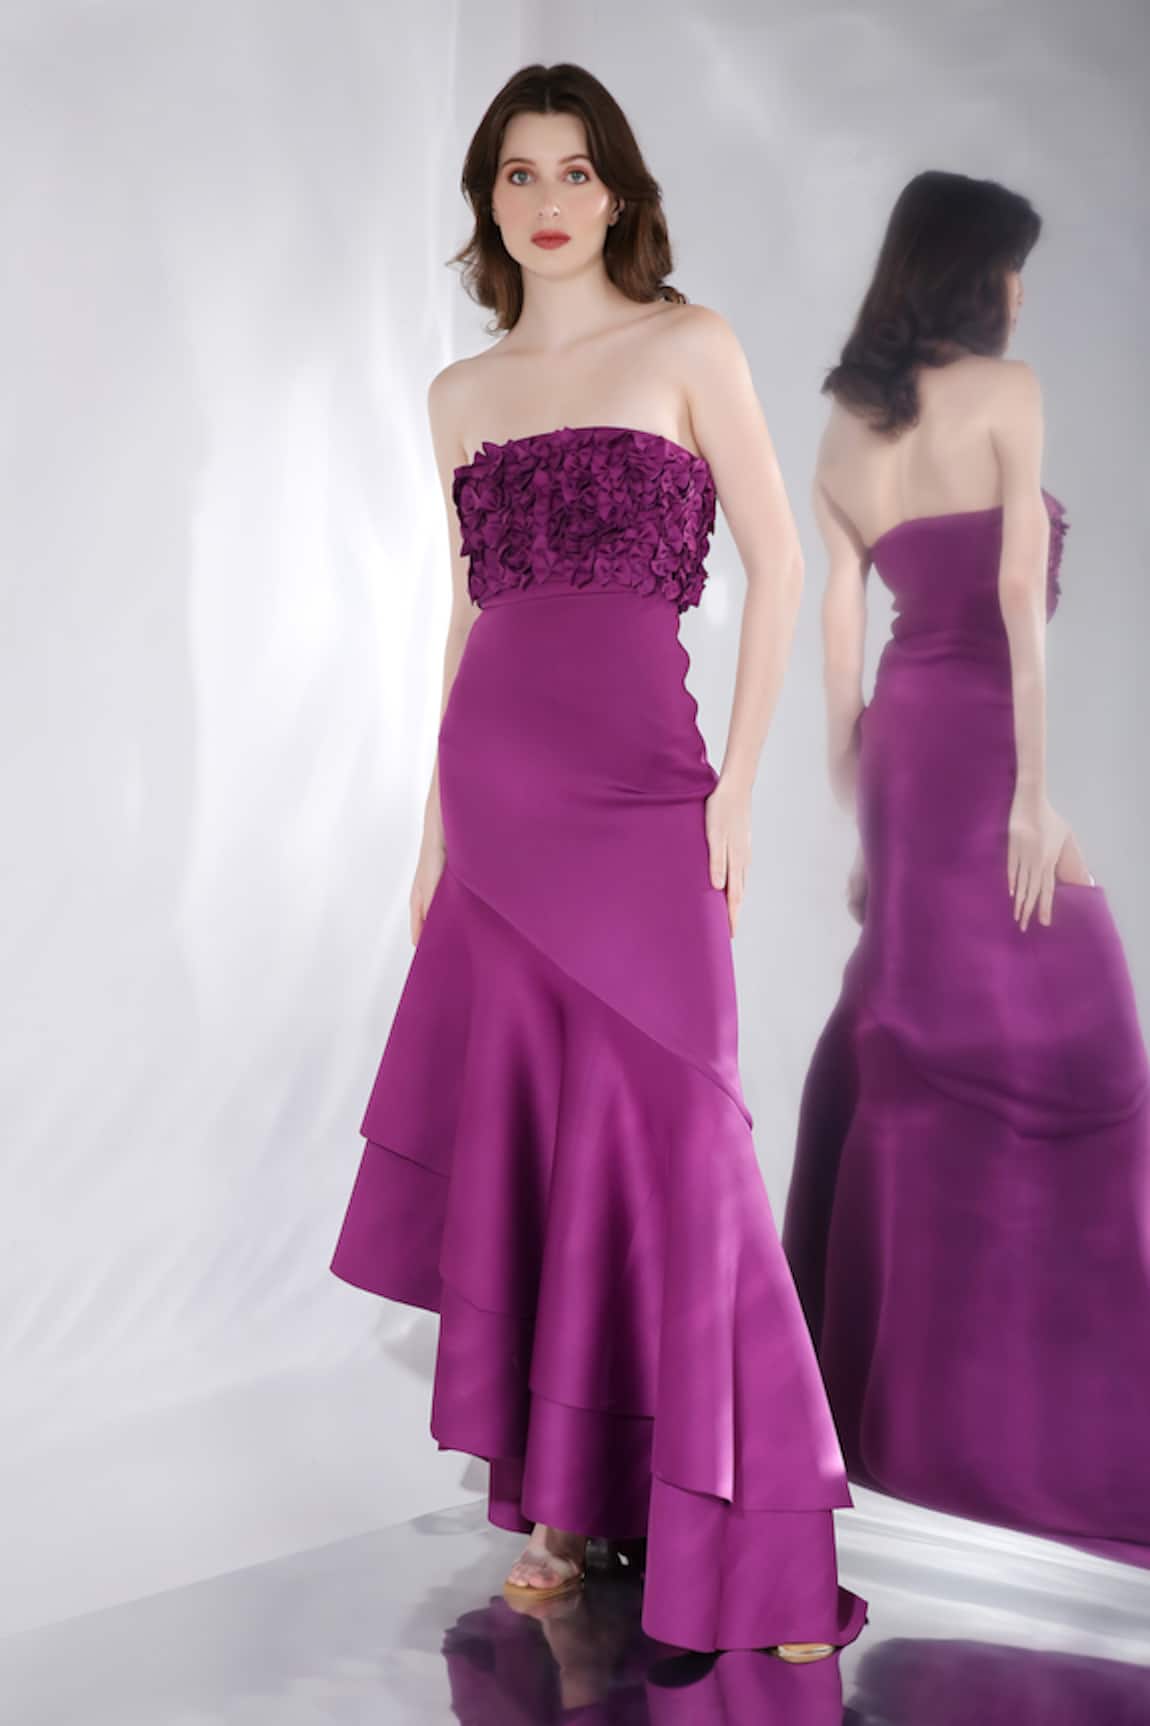 Ozeqo Bradley Strapless Gown With Bow Overlay